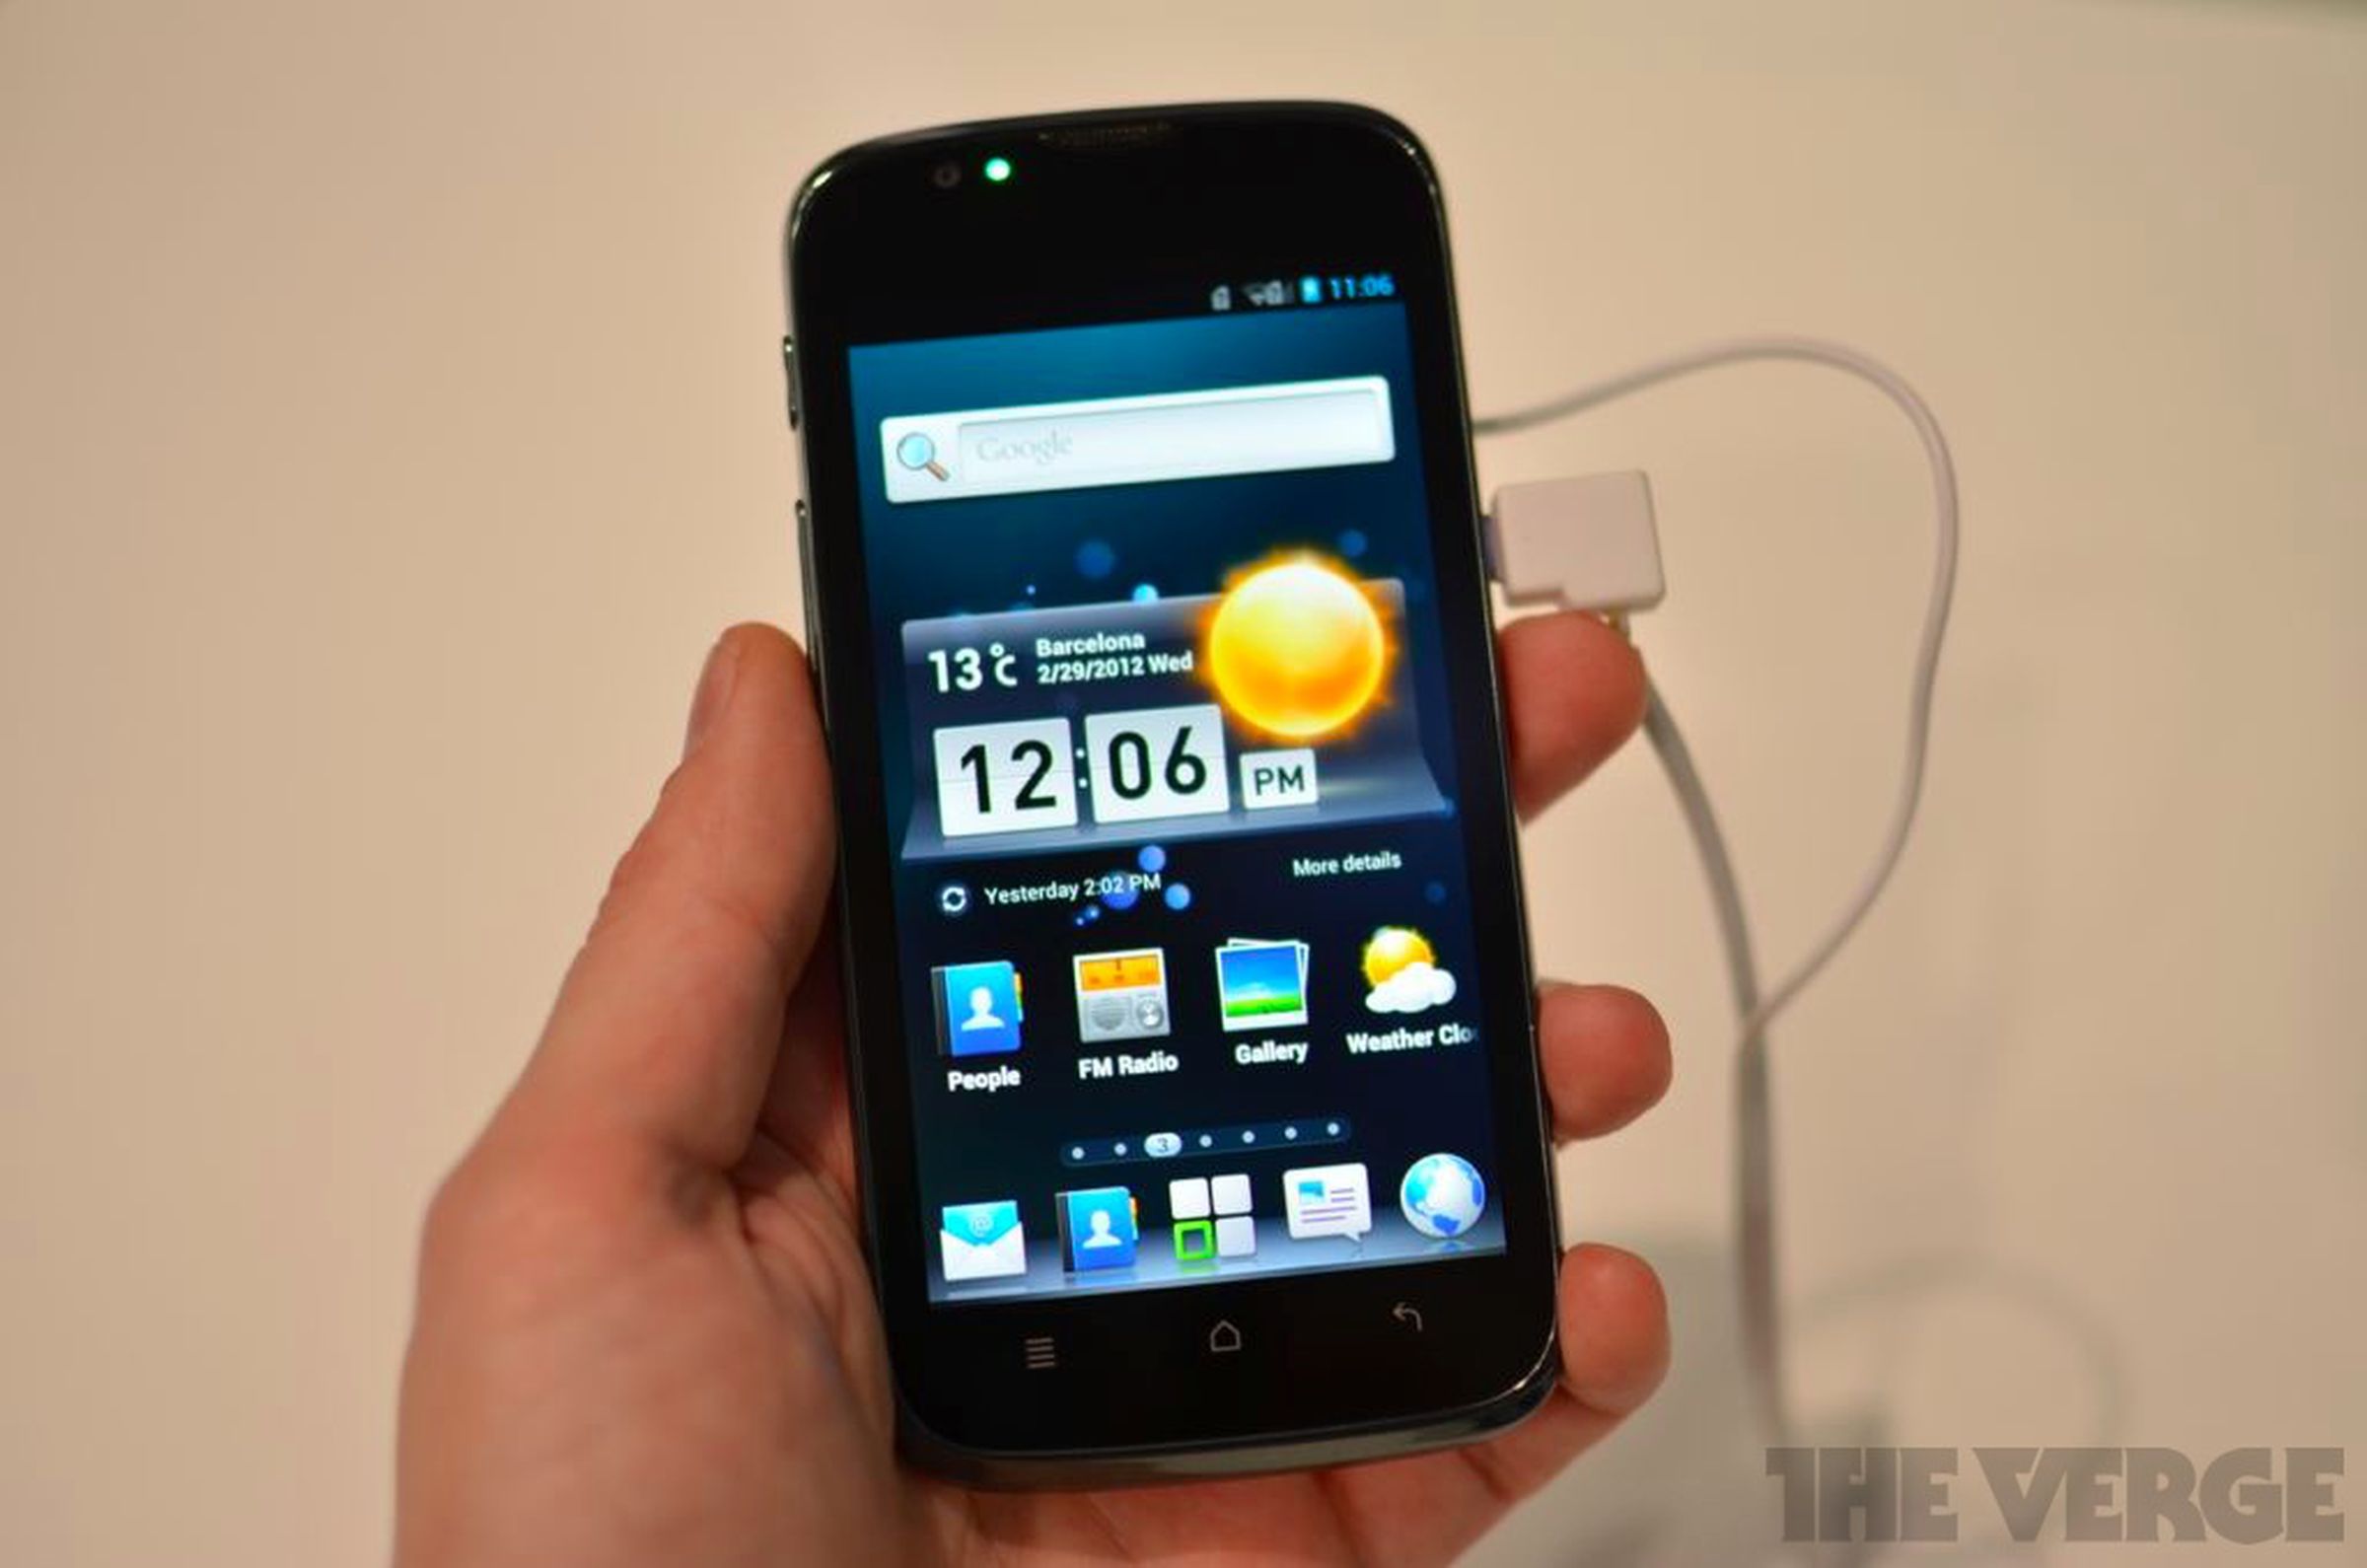 Huawei Ascend P1 lte hands-on pictures